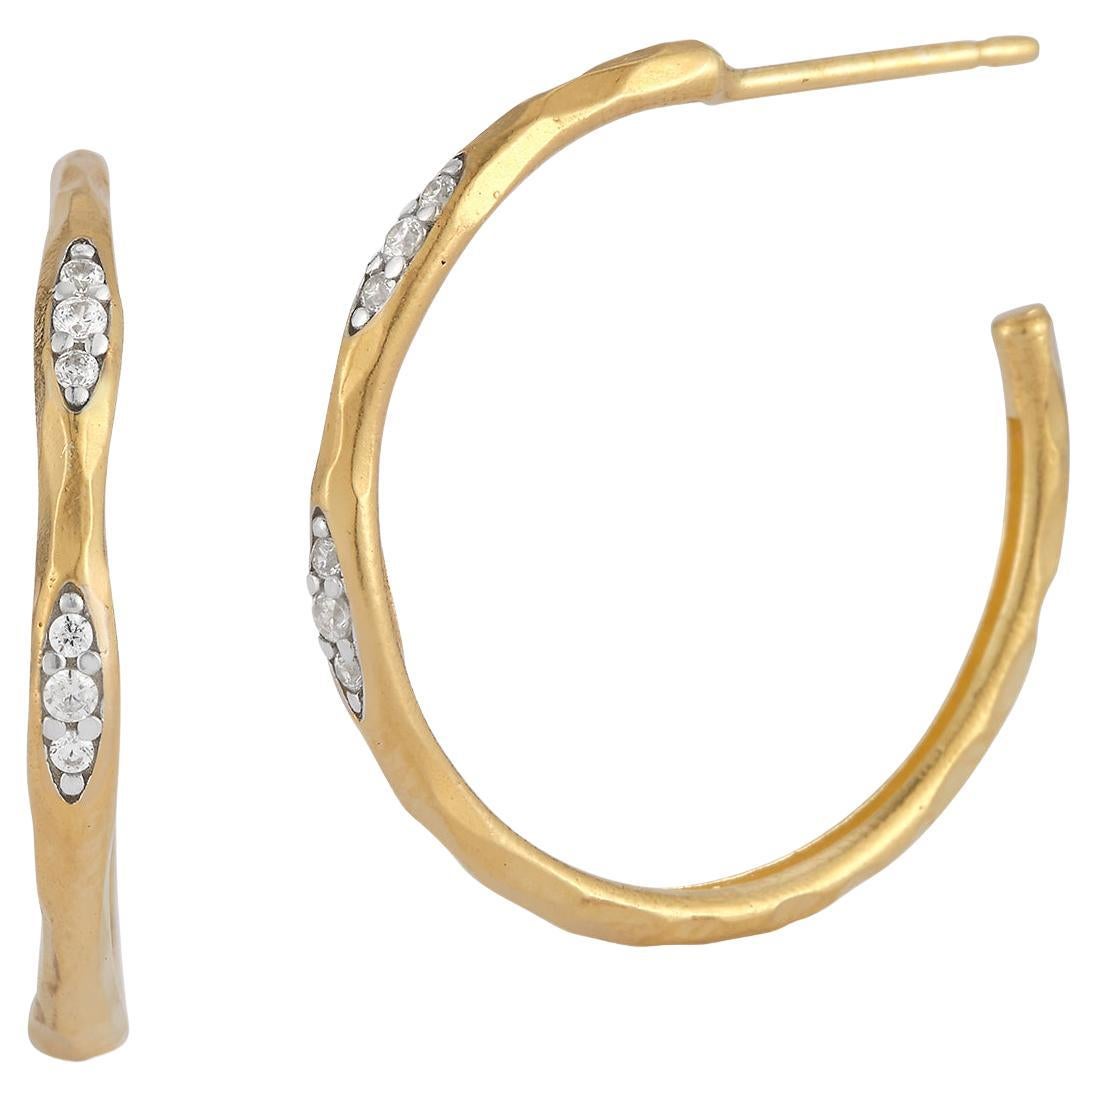 Hand-Crafted 14K Yellow Gold Hammered Hoop Earrings, Accented with Diamonds For Sale